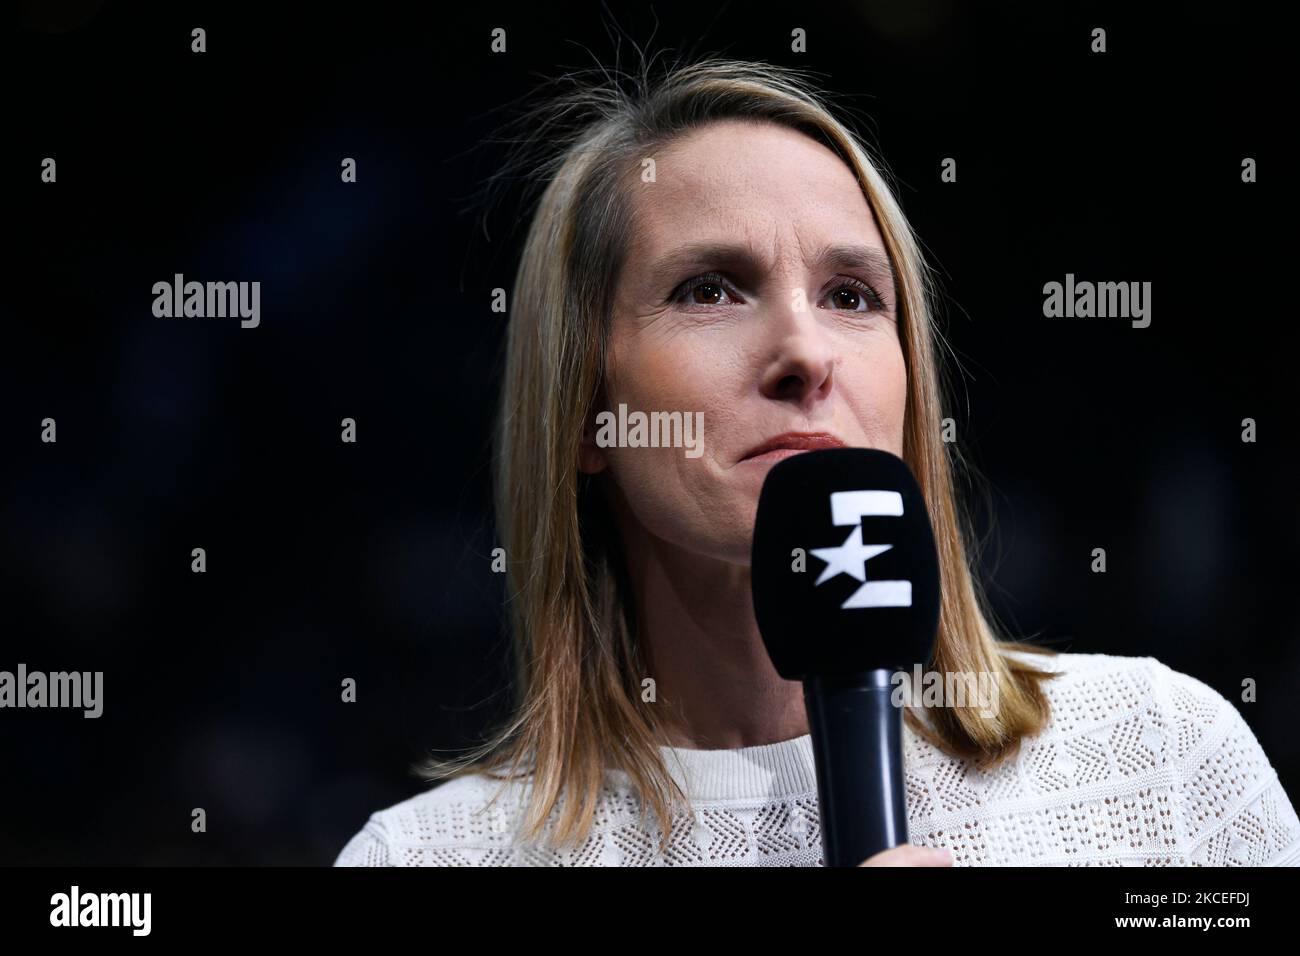 Justine Henin, consultant for the television TV channel Eurosport during the Rolex Paris Masters, ATP Masters 1000 tennis tournament, on November 4, 2022 at Accor Arena in Paris, France